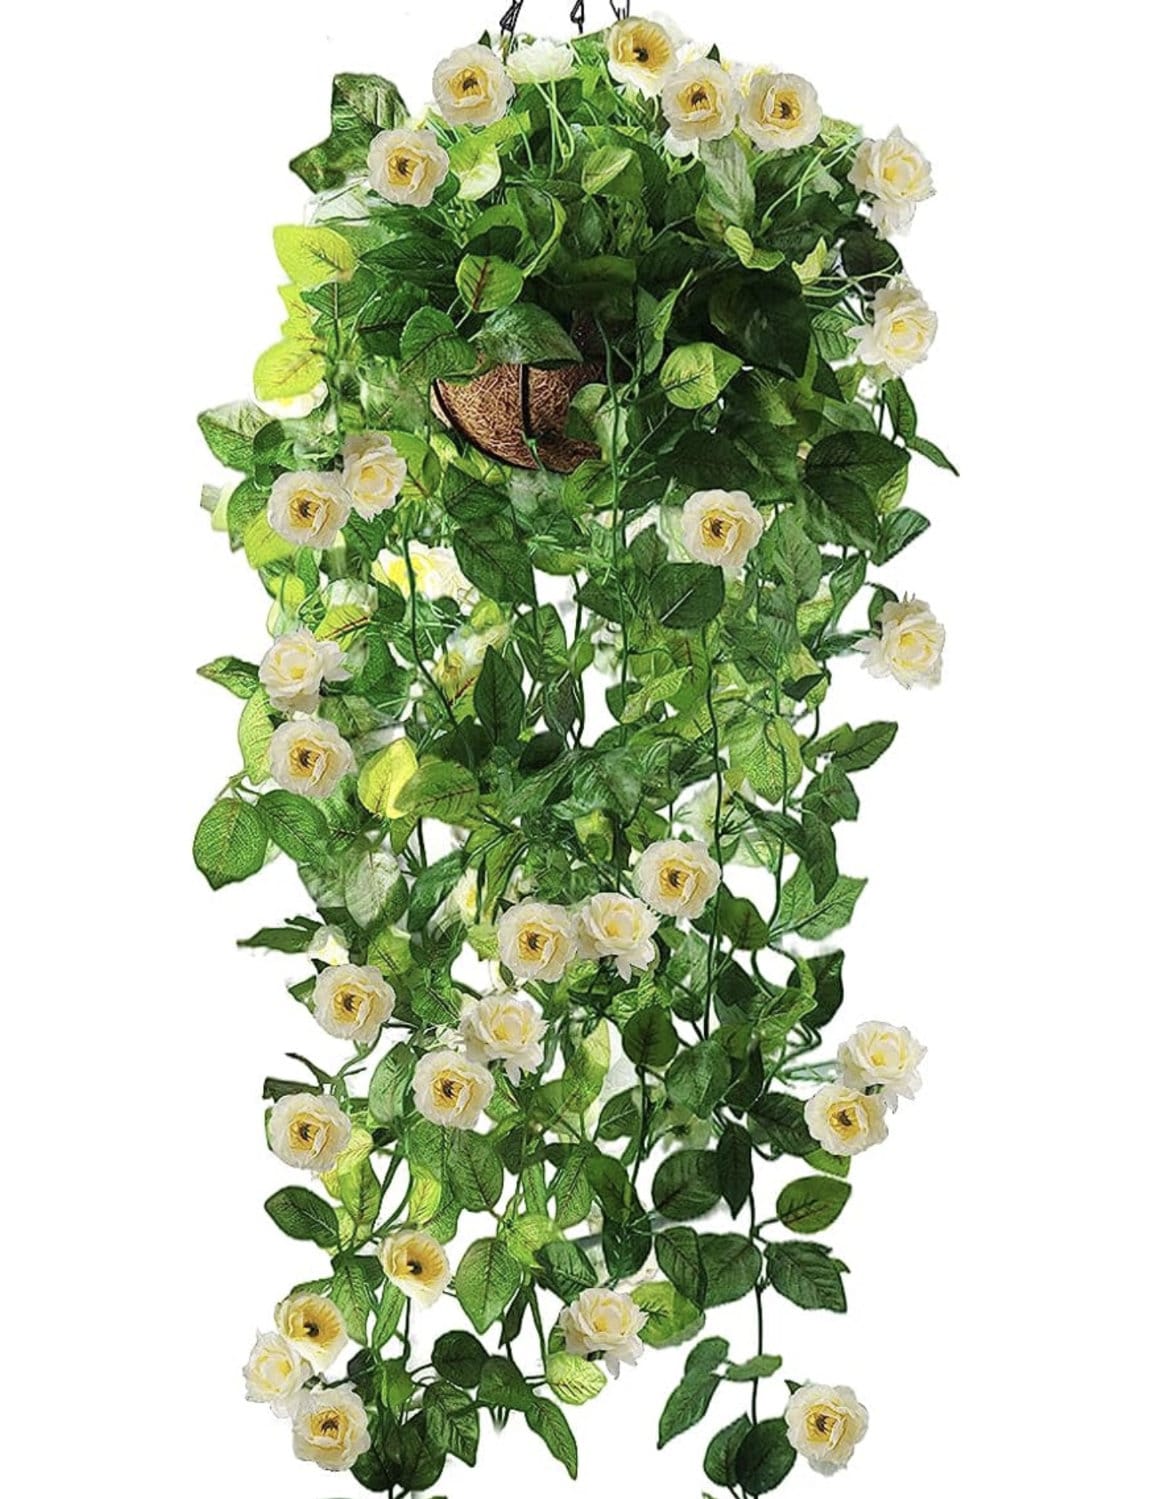 Artificial Hanging Flower Fake Hanging Rose Flower Vine Hanging Plants Faux Flowers for Porch Eave Wall Home Room Garden Office Wedding Decoration